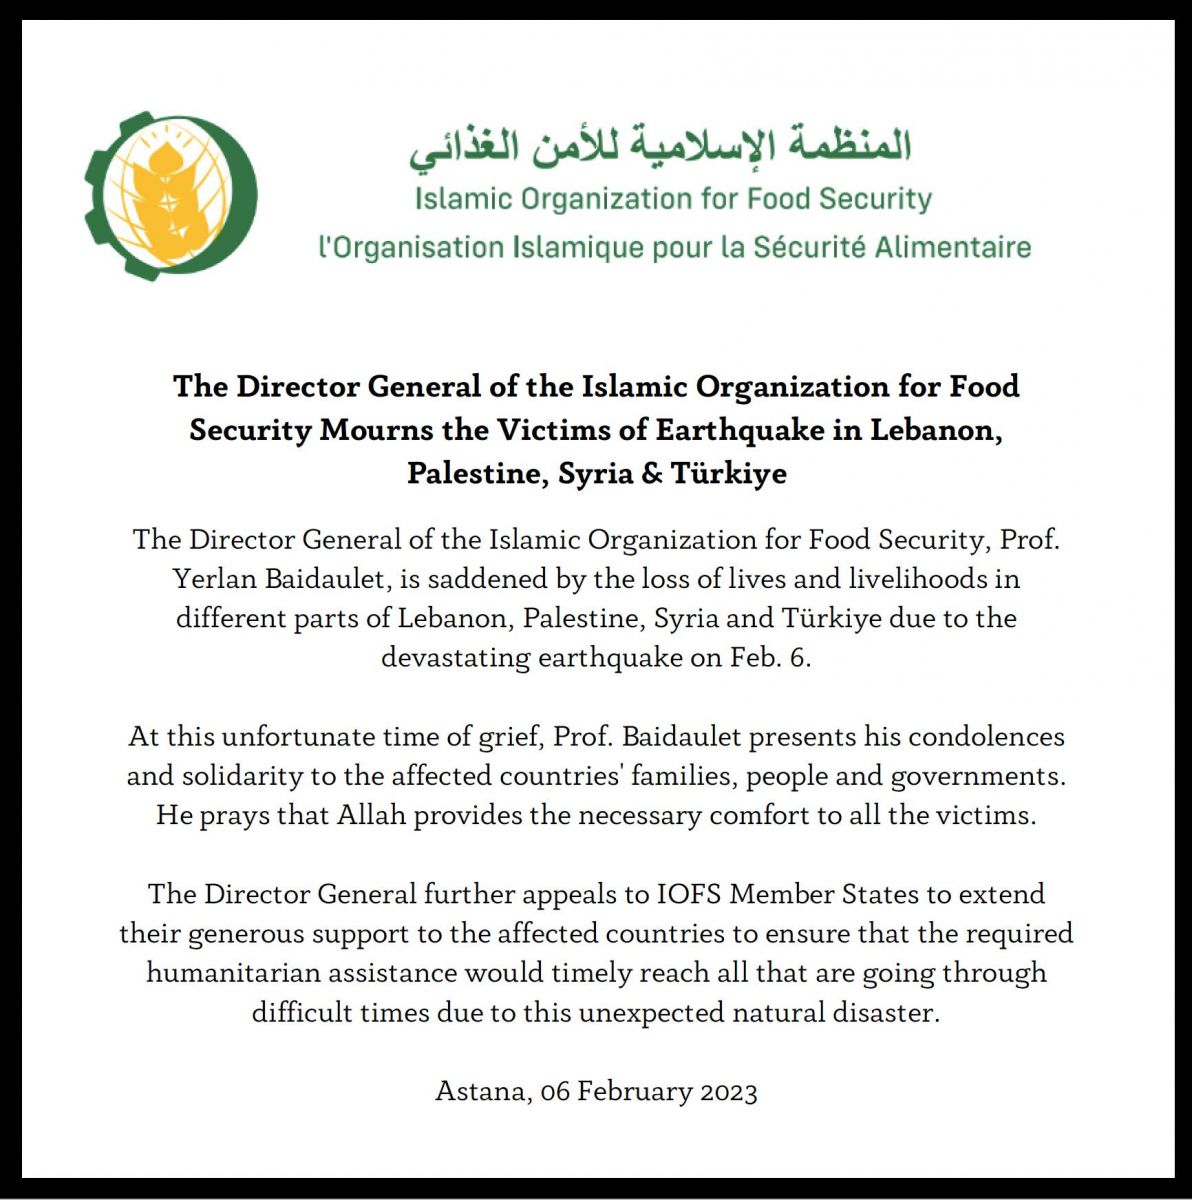 The Director General of IOFS Offers Condolences over Earthquake Disasters 